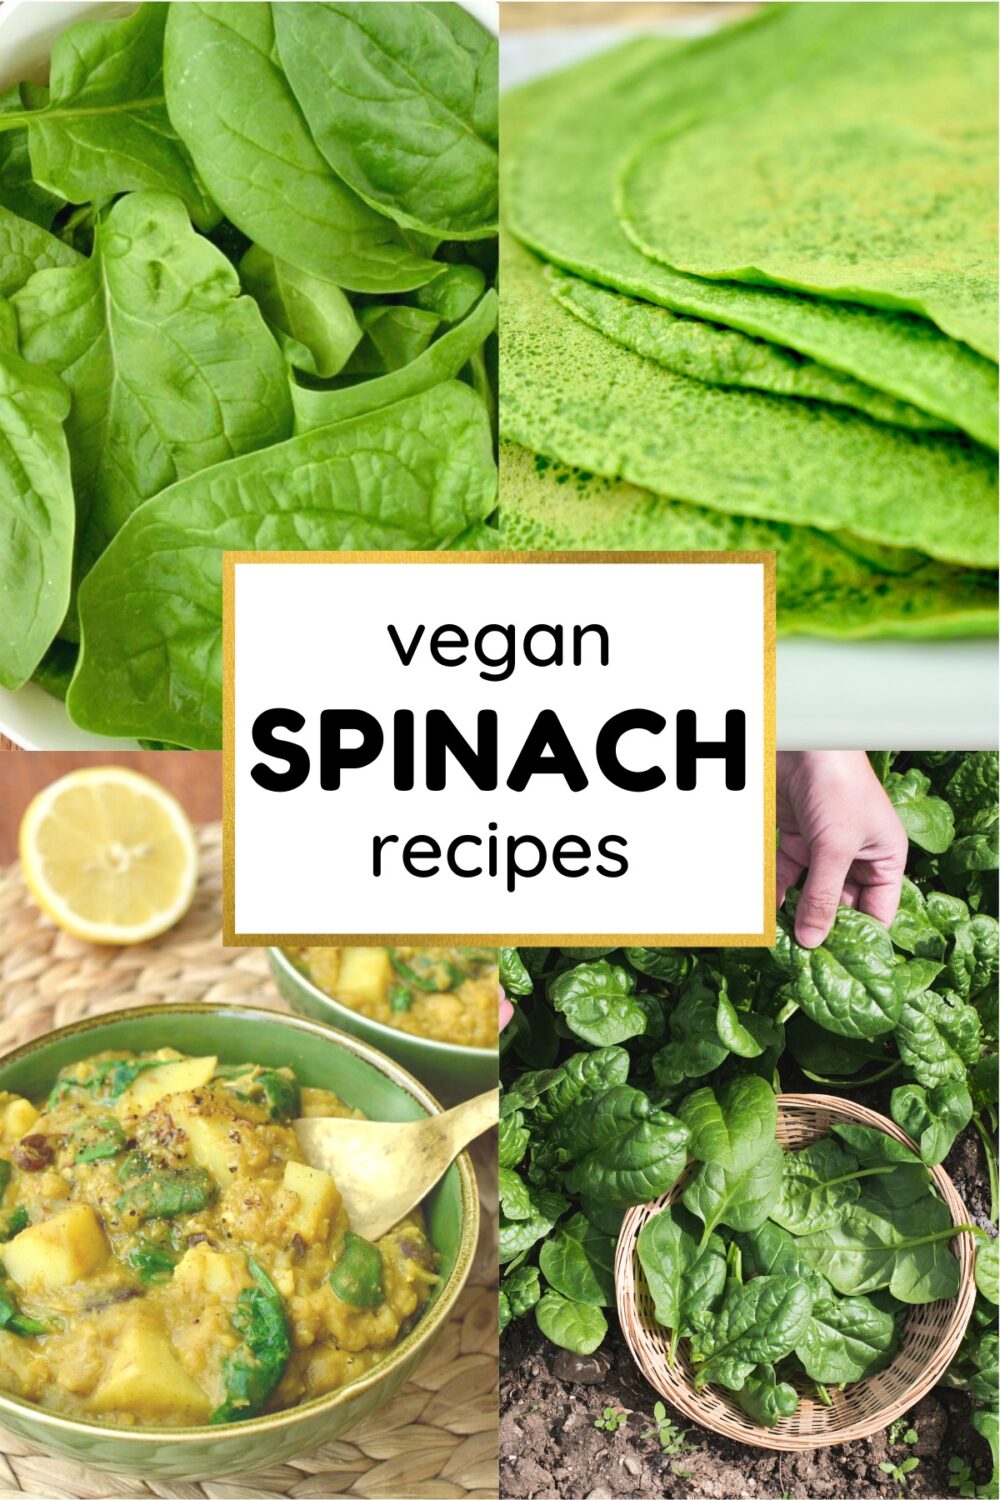 A Collage of Vegan Spinach Recipes - Pancakes, Dahl, and Fresh Spinach Leaves.